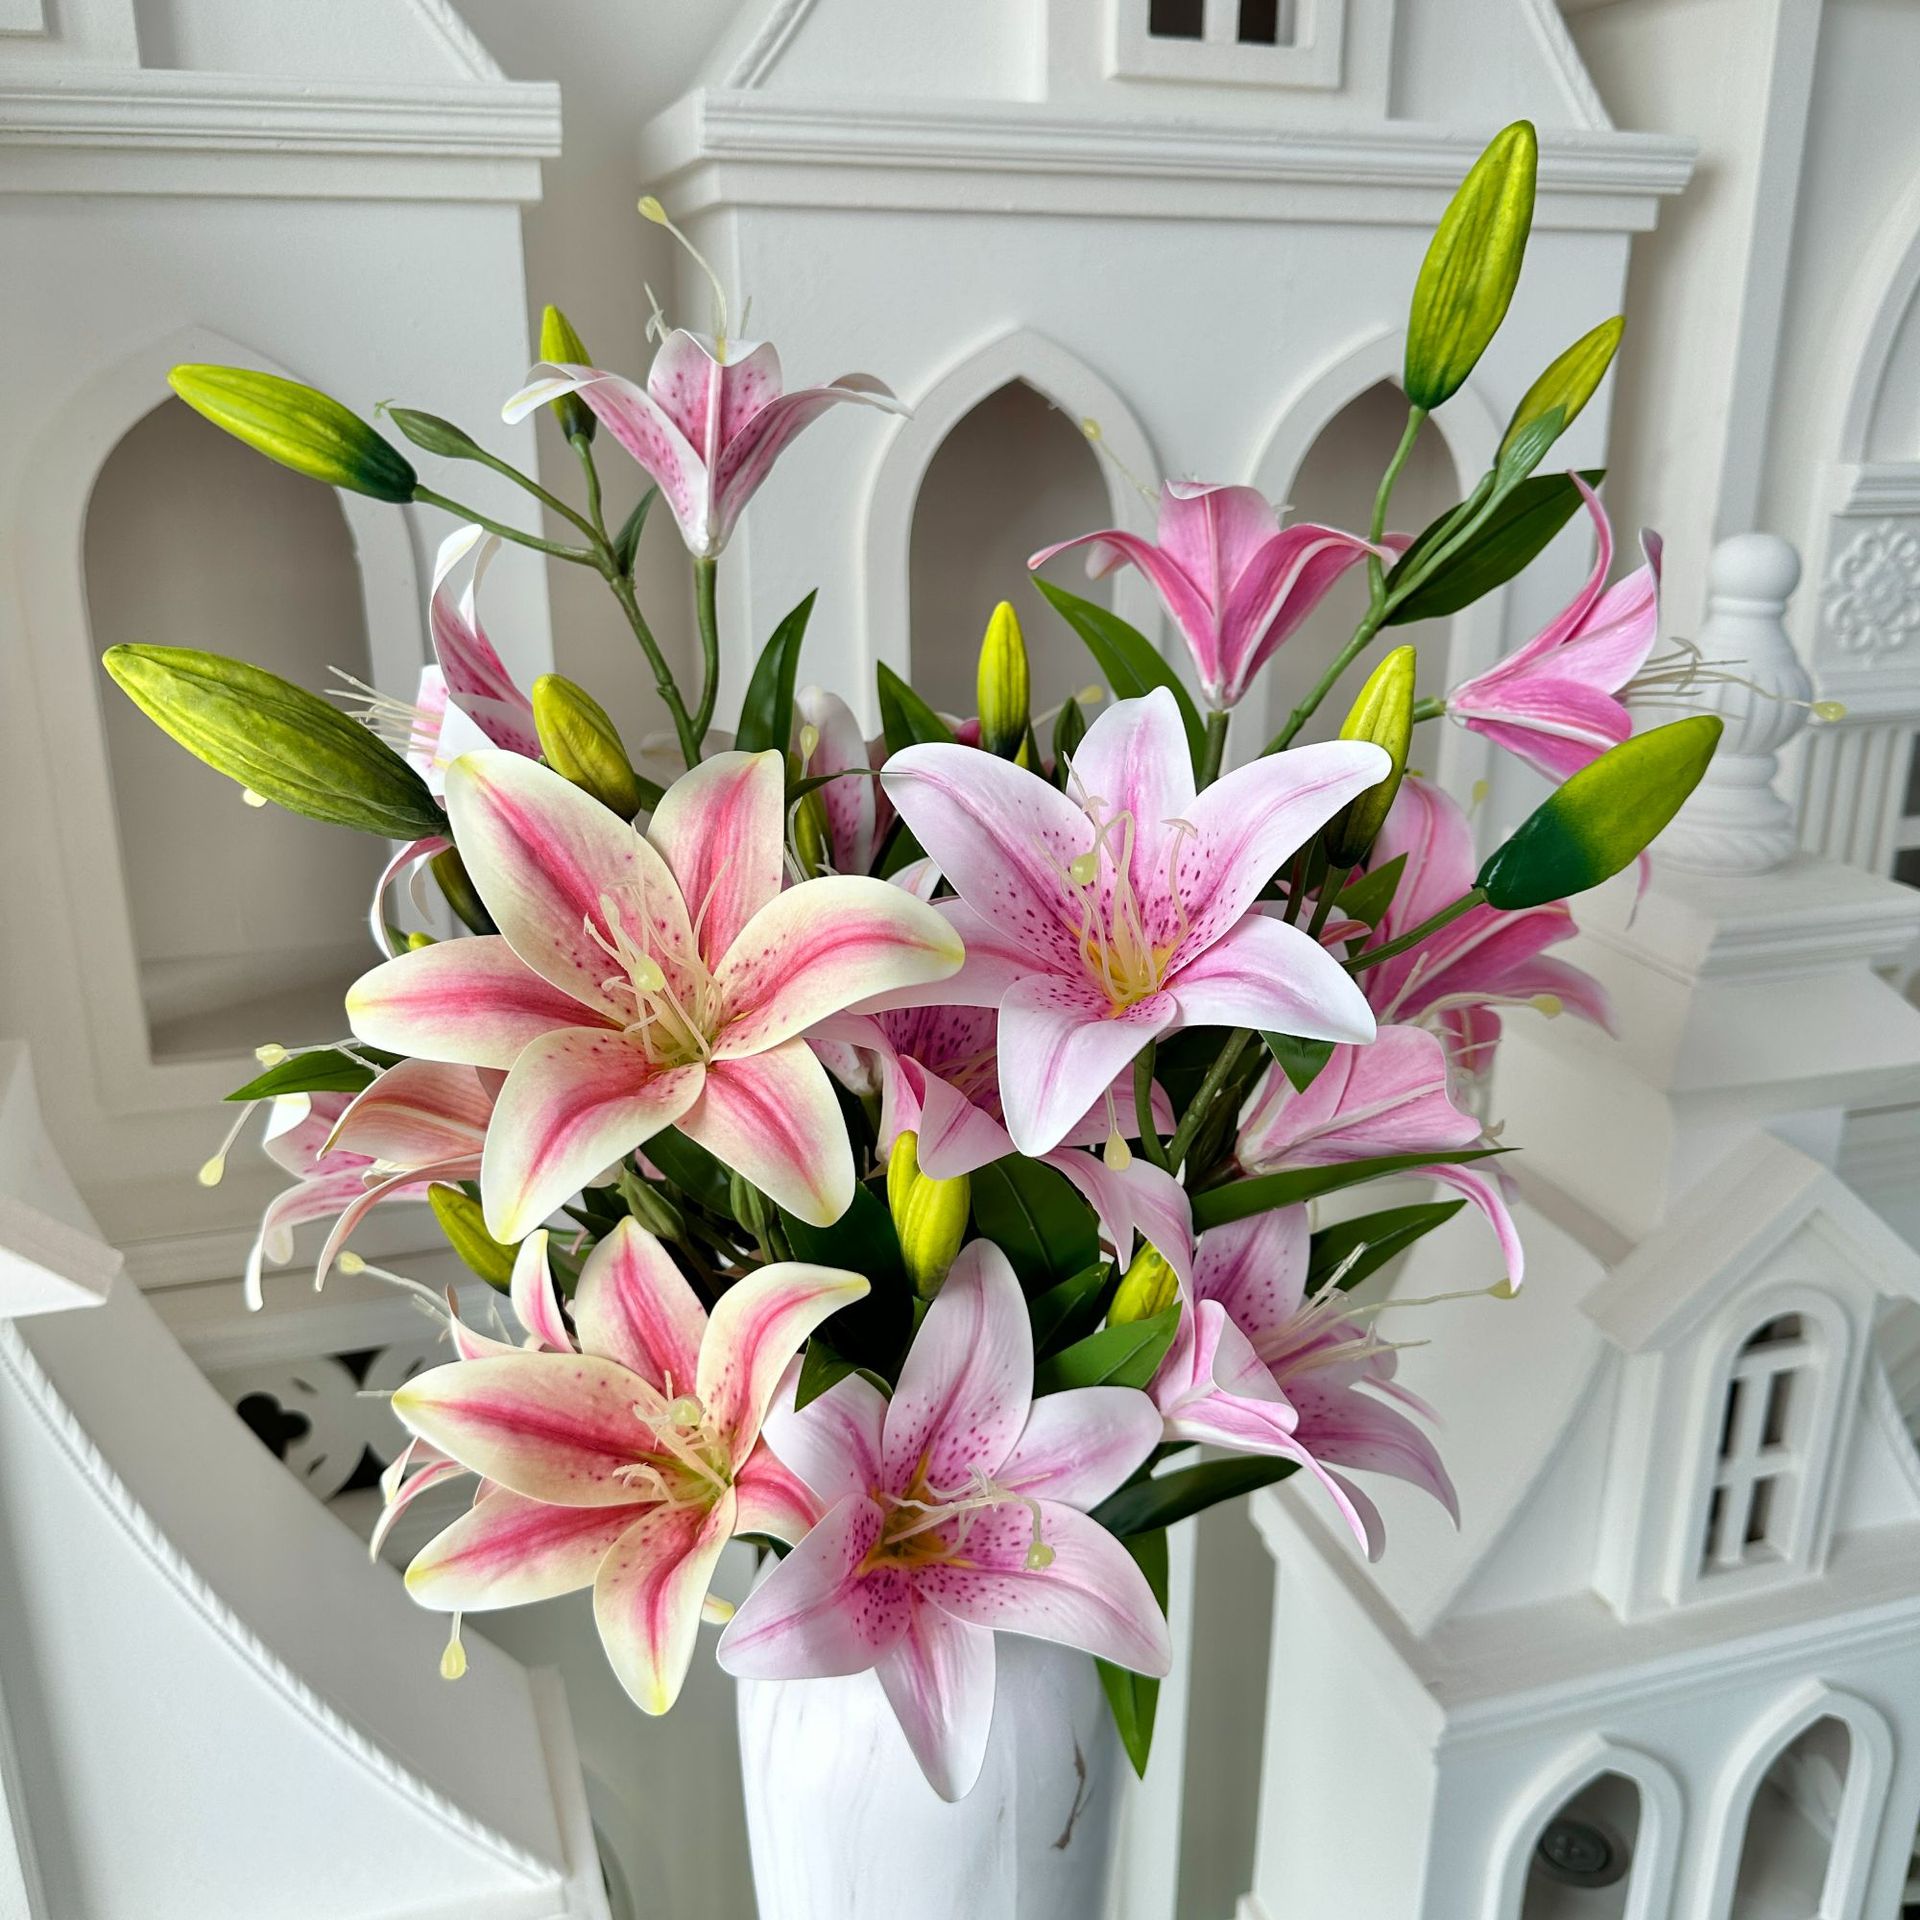 Wedding Celebration Decoration Meibao 6 Lily Artificial Flowers Road Lead Decorative Flowers Home Hotel Table Decoration Fake Flowers